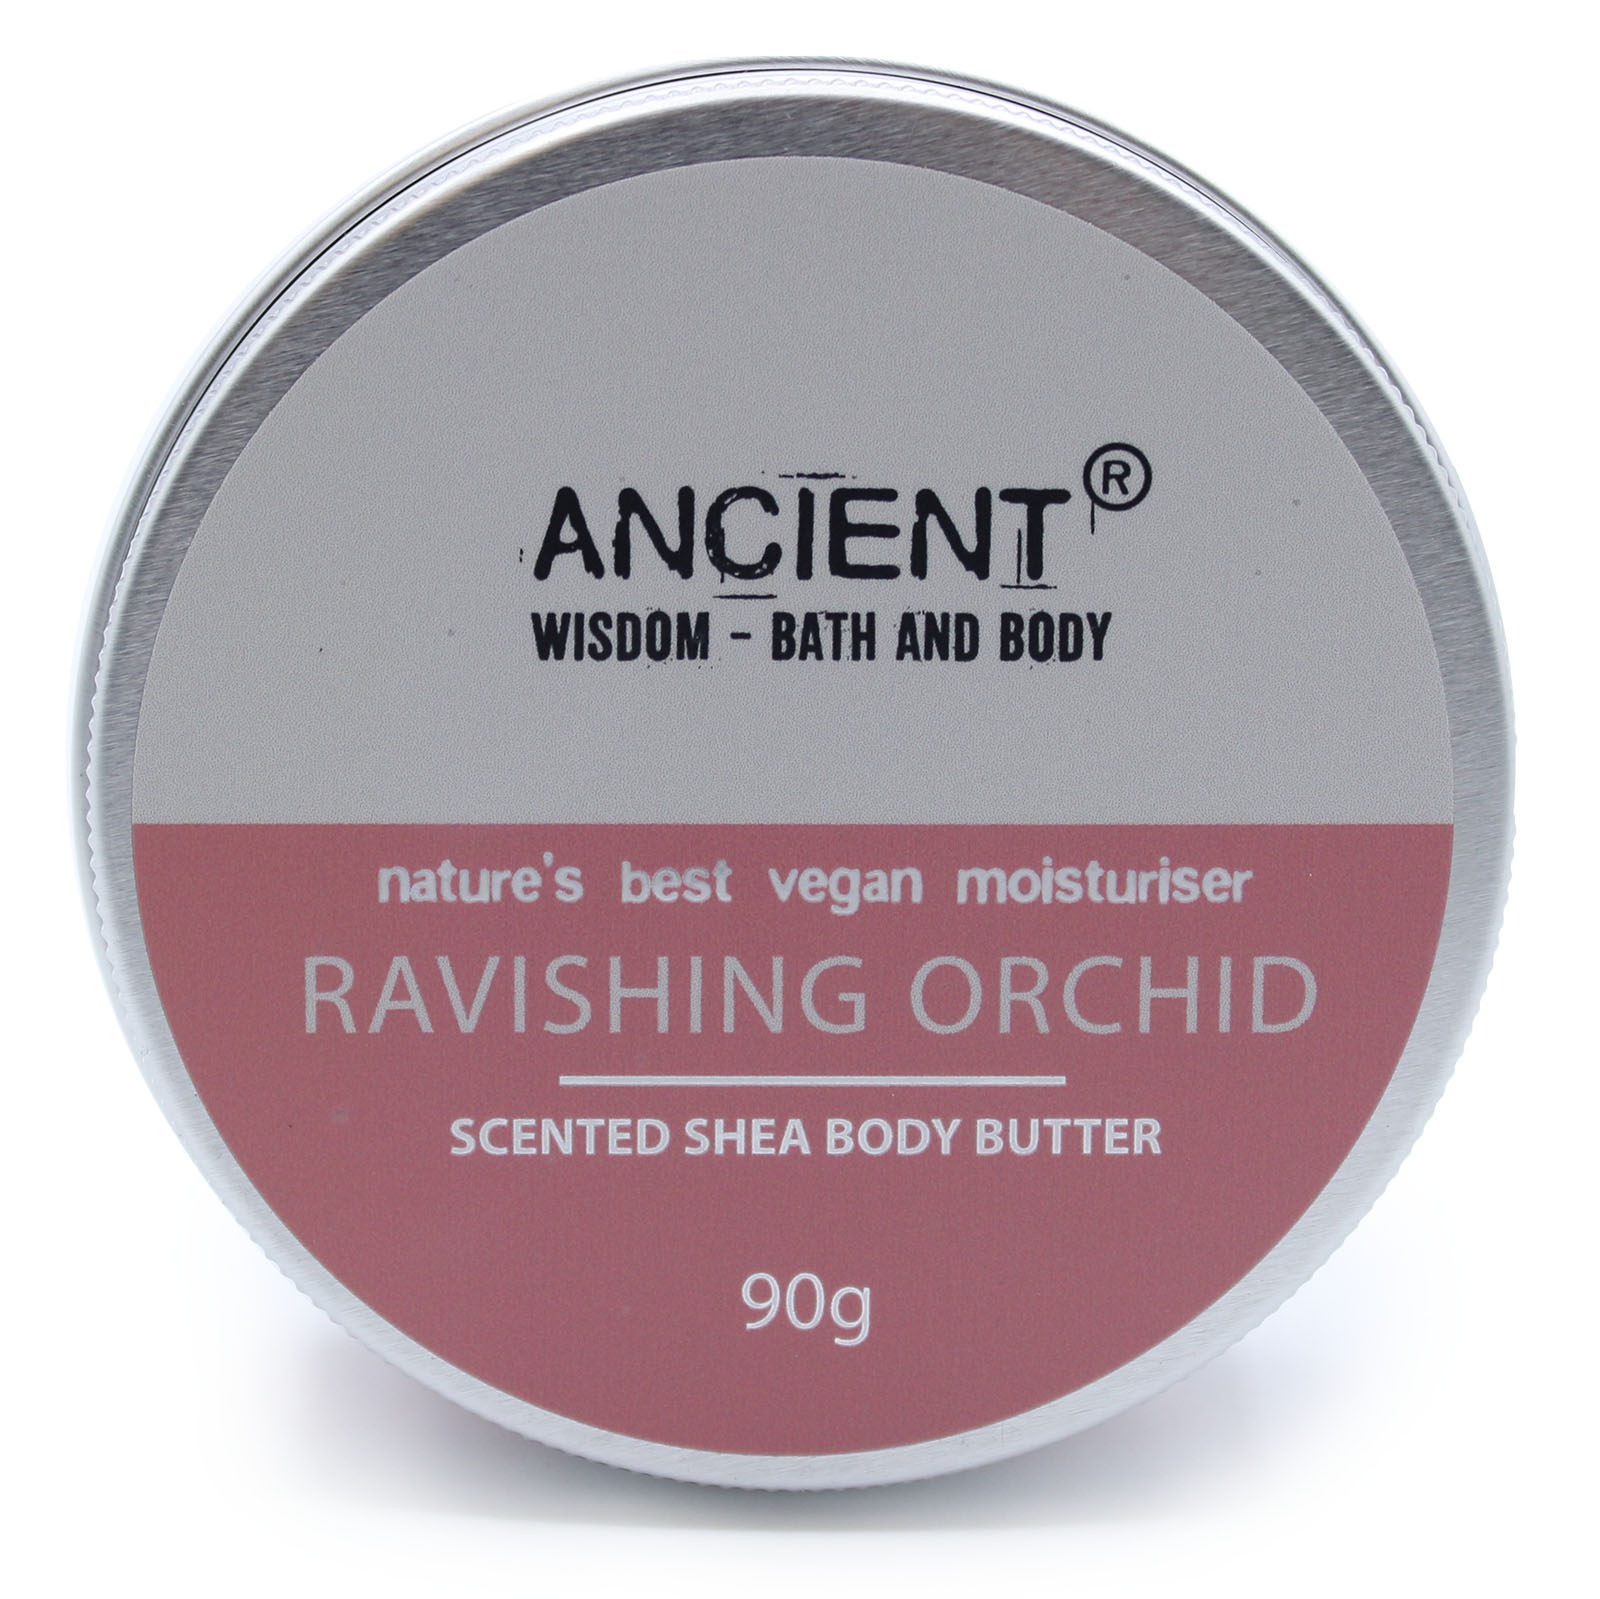 Scented Shea Body Butter 90g - Ravishing Orchid - Click Image to Close